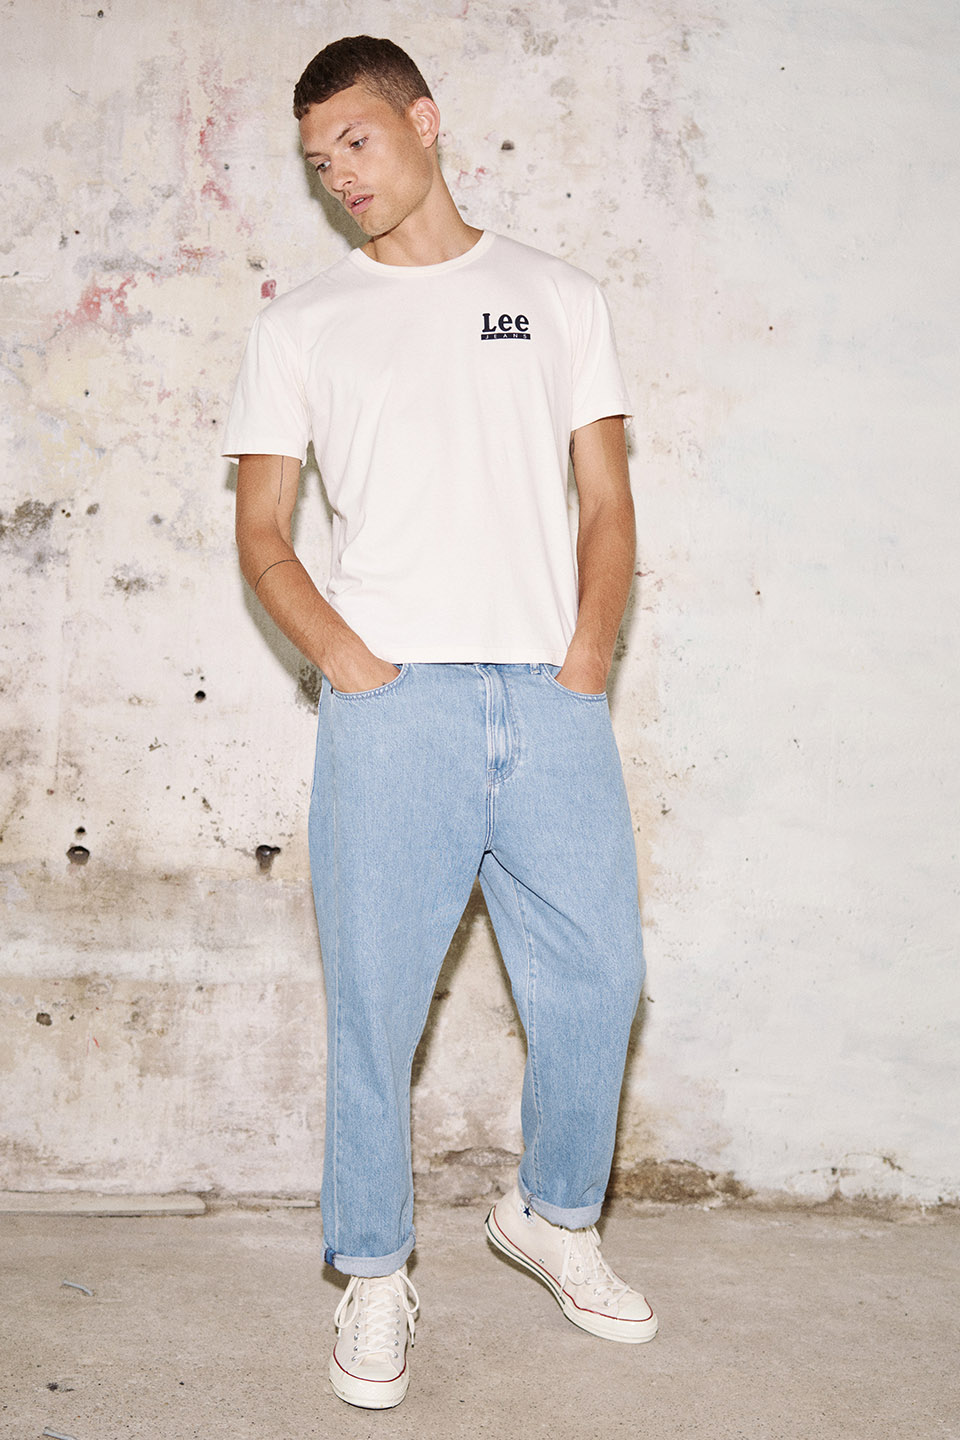 Here's Your First Look at Lee's Pre-Fall 2019 Drop